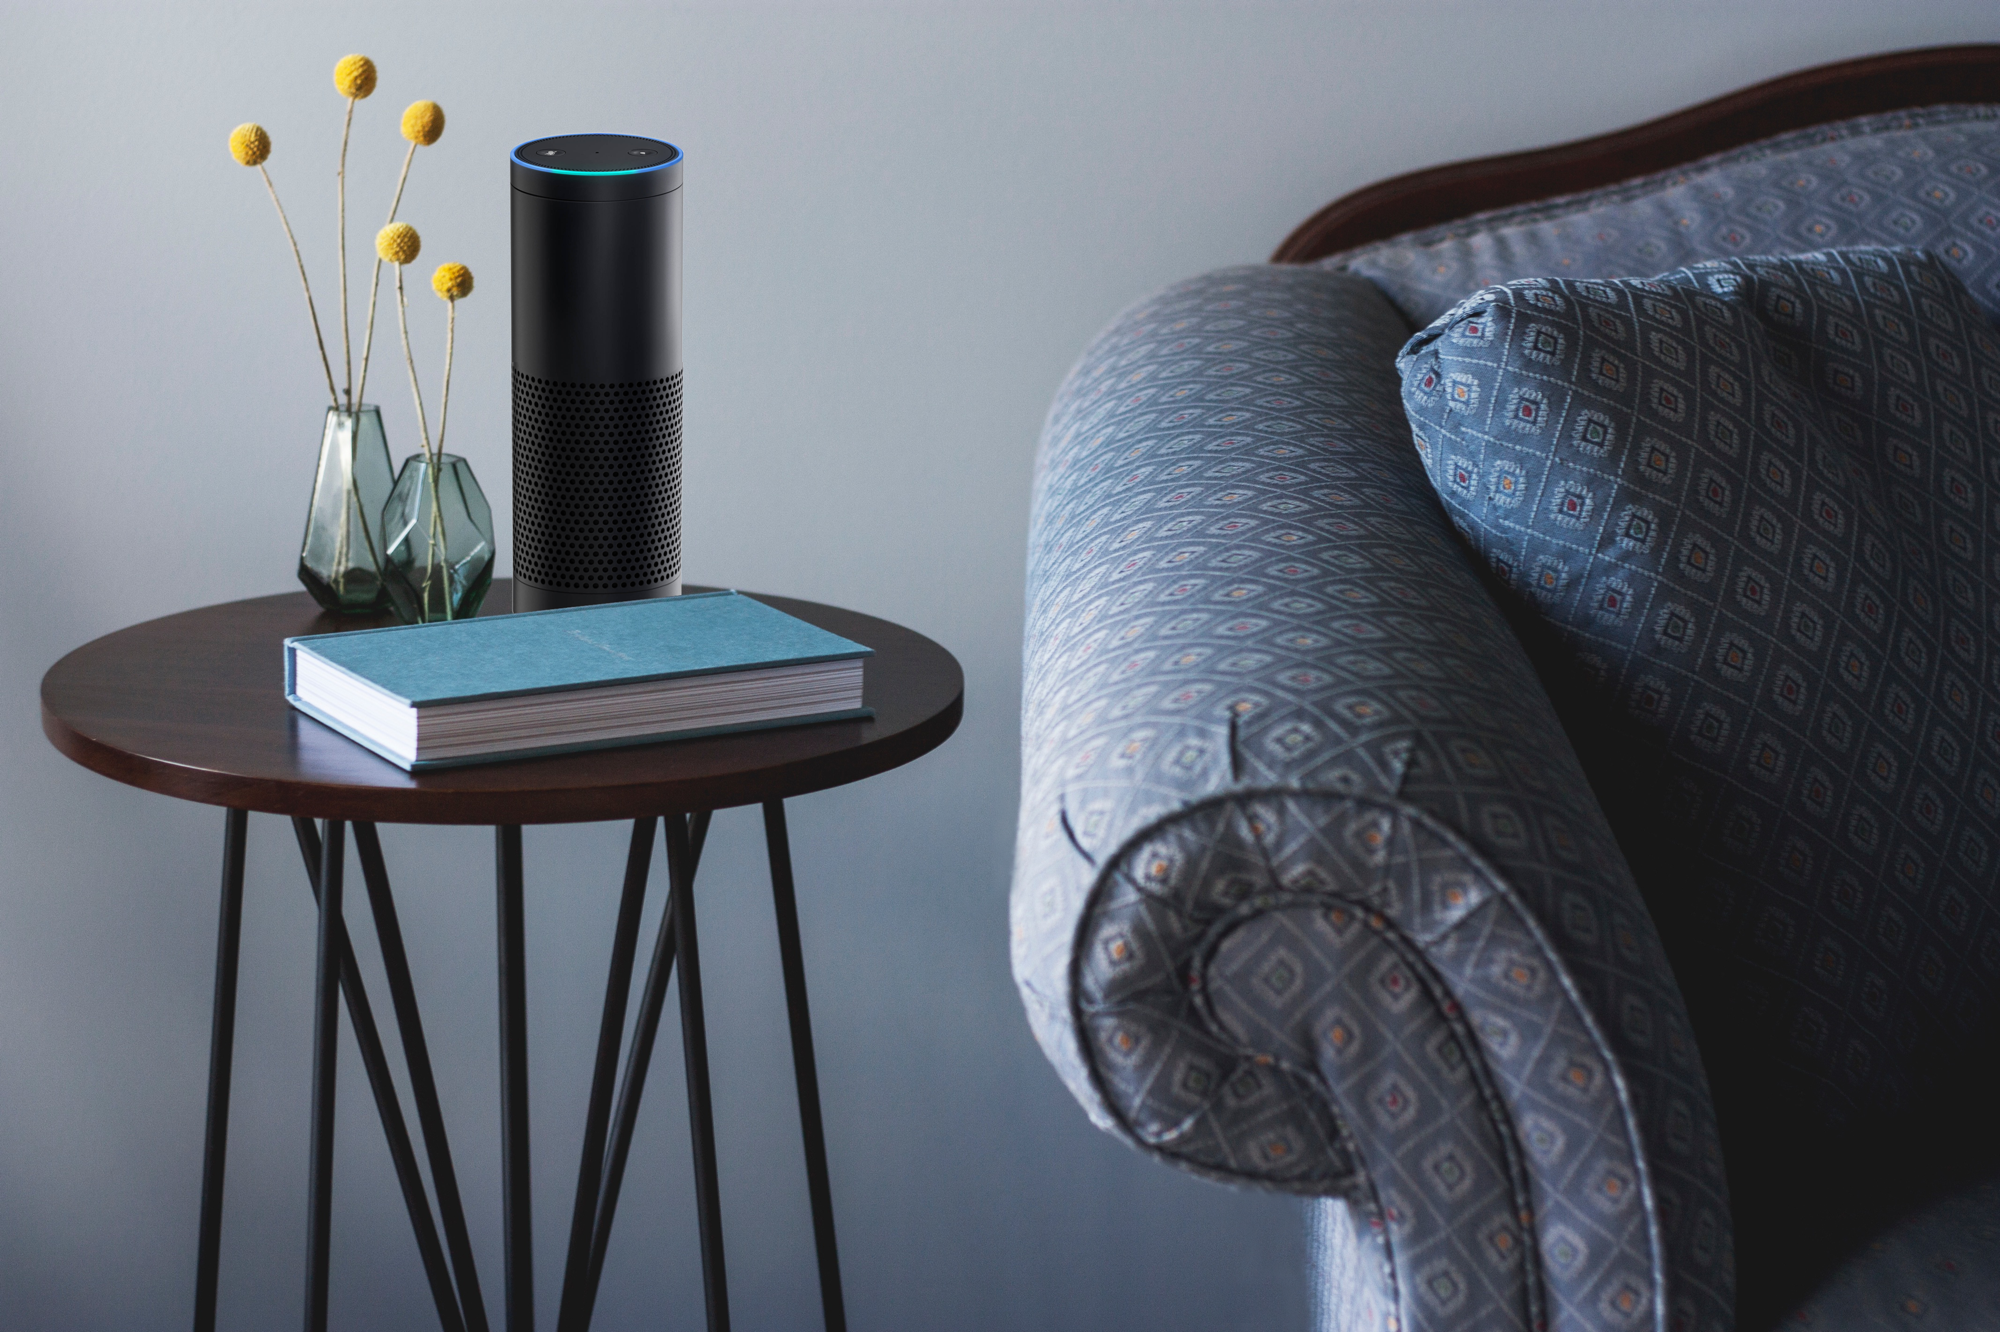 Cover image for  article: NPR/Edison Research: With Smart Speaker Market Growth, Privacy and Security Concerns Grow Too